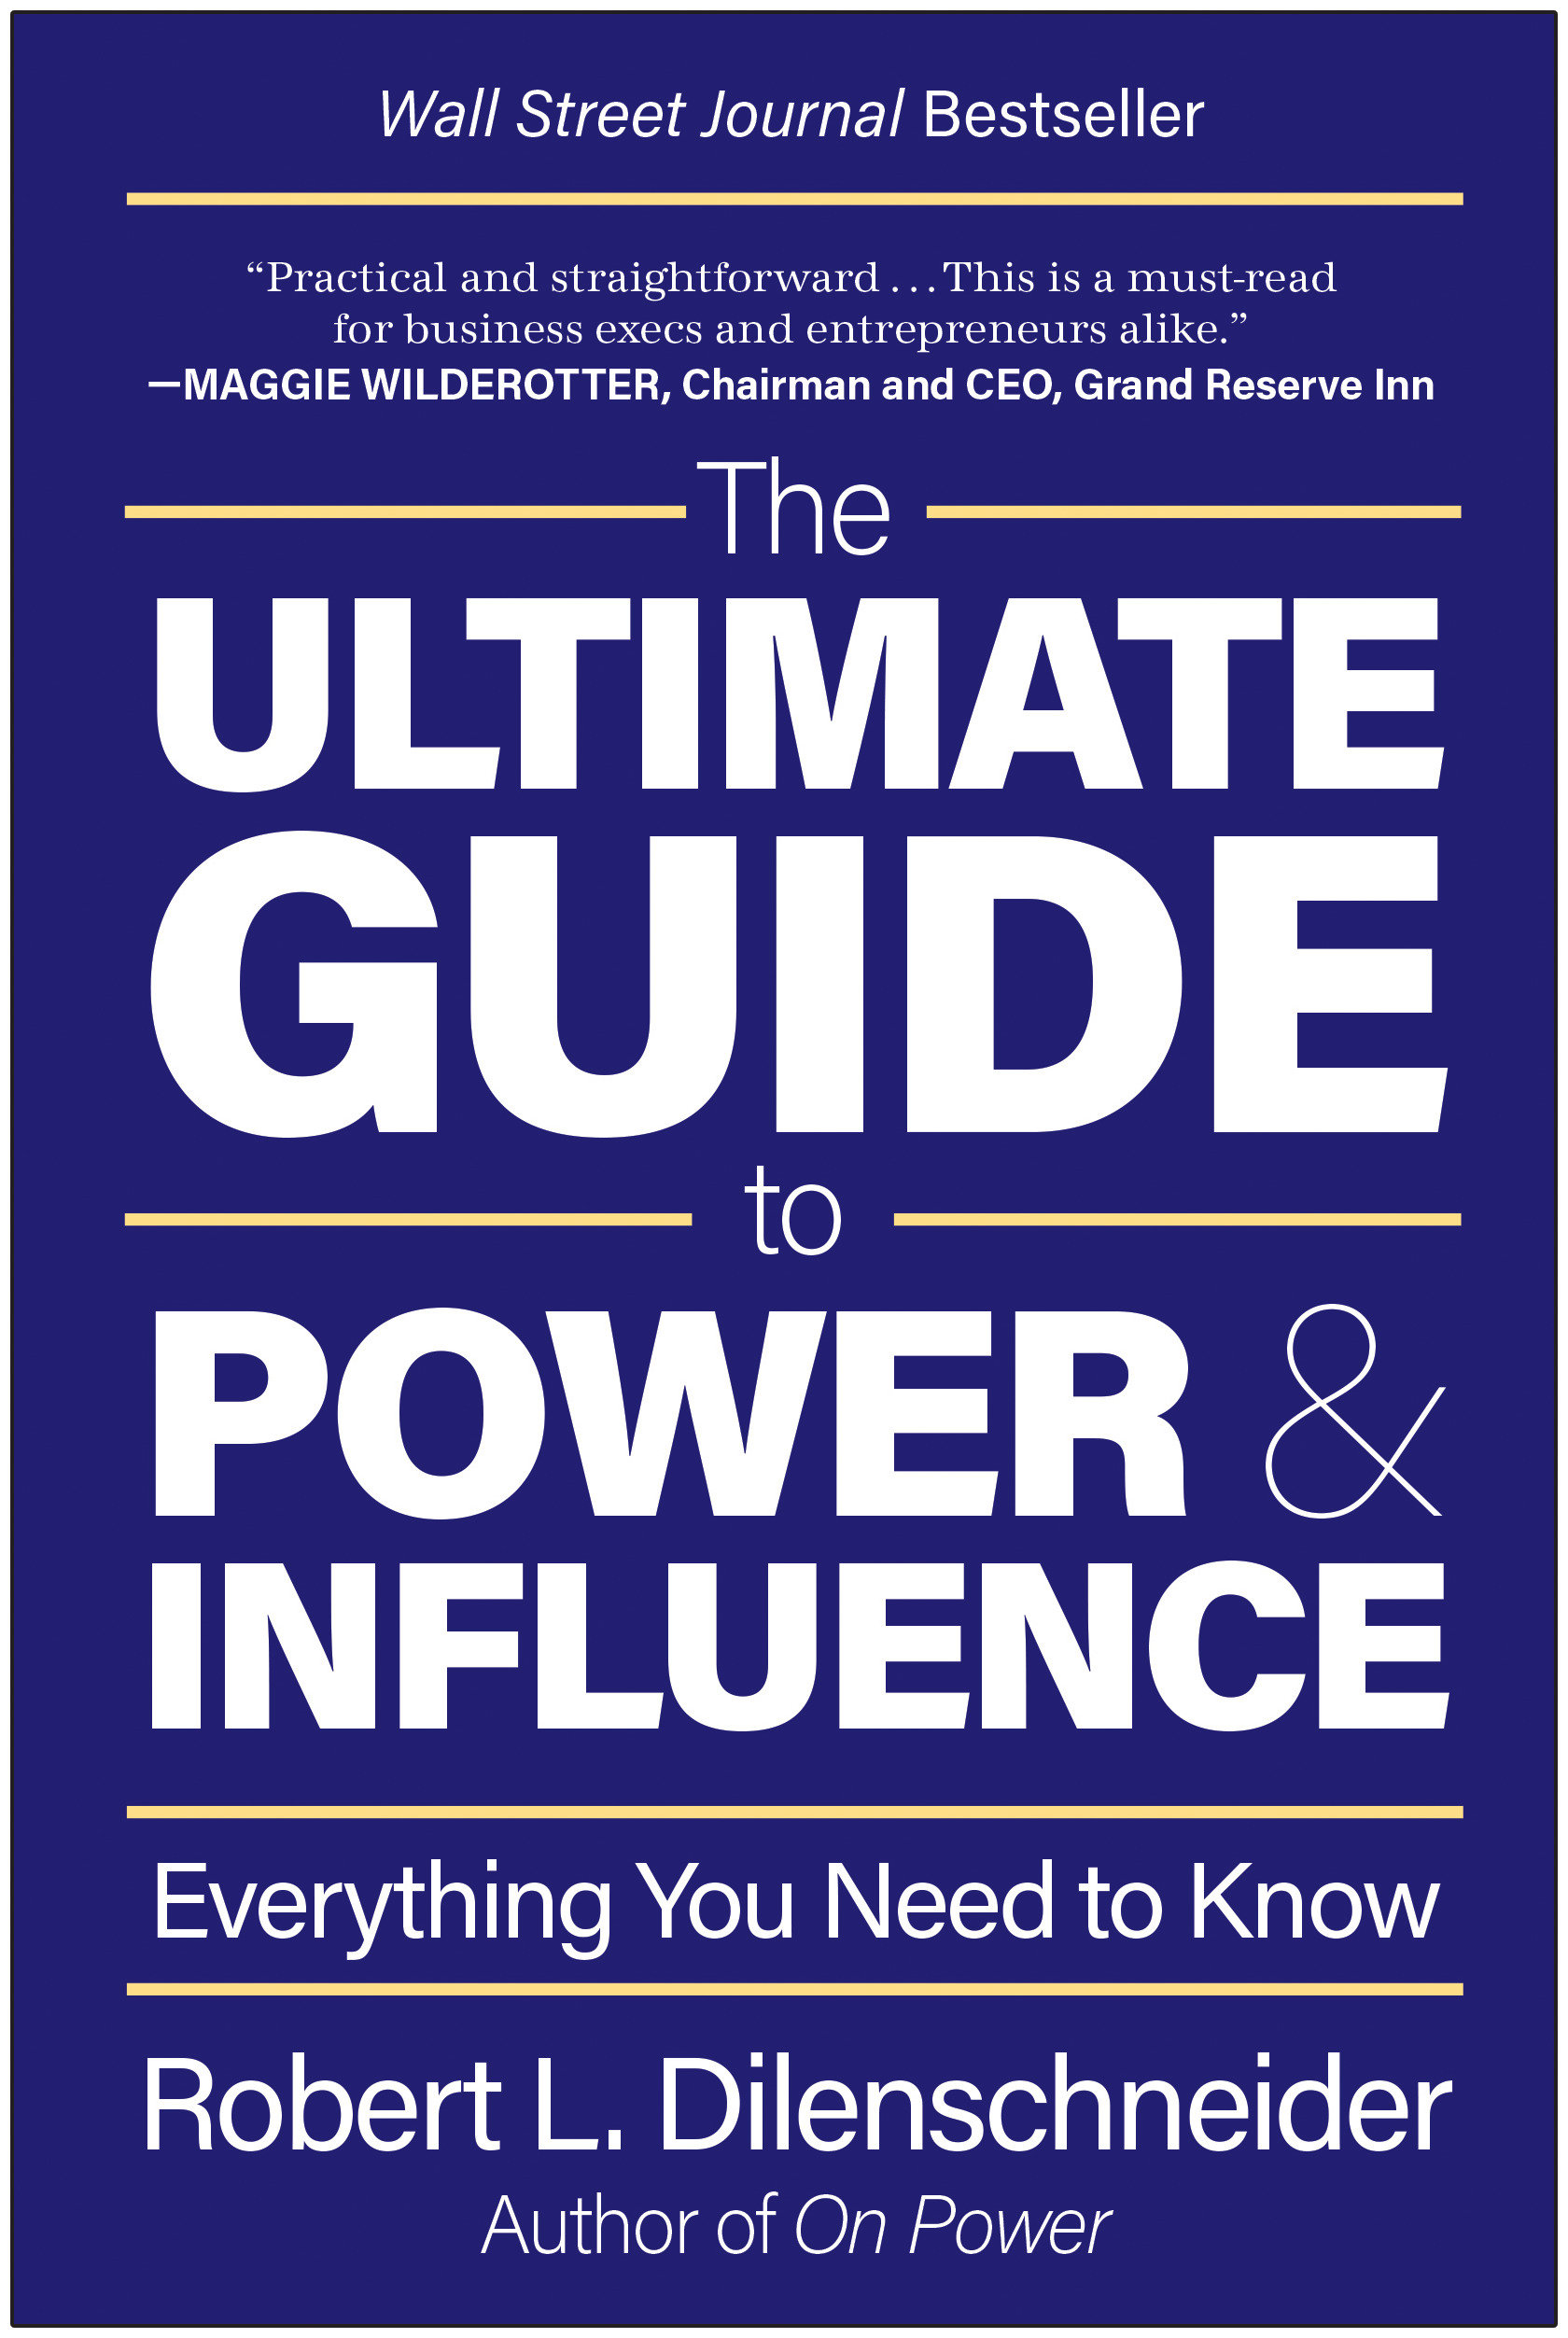 The Ultimate Guide To Power & Influence (Hardcover Book)